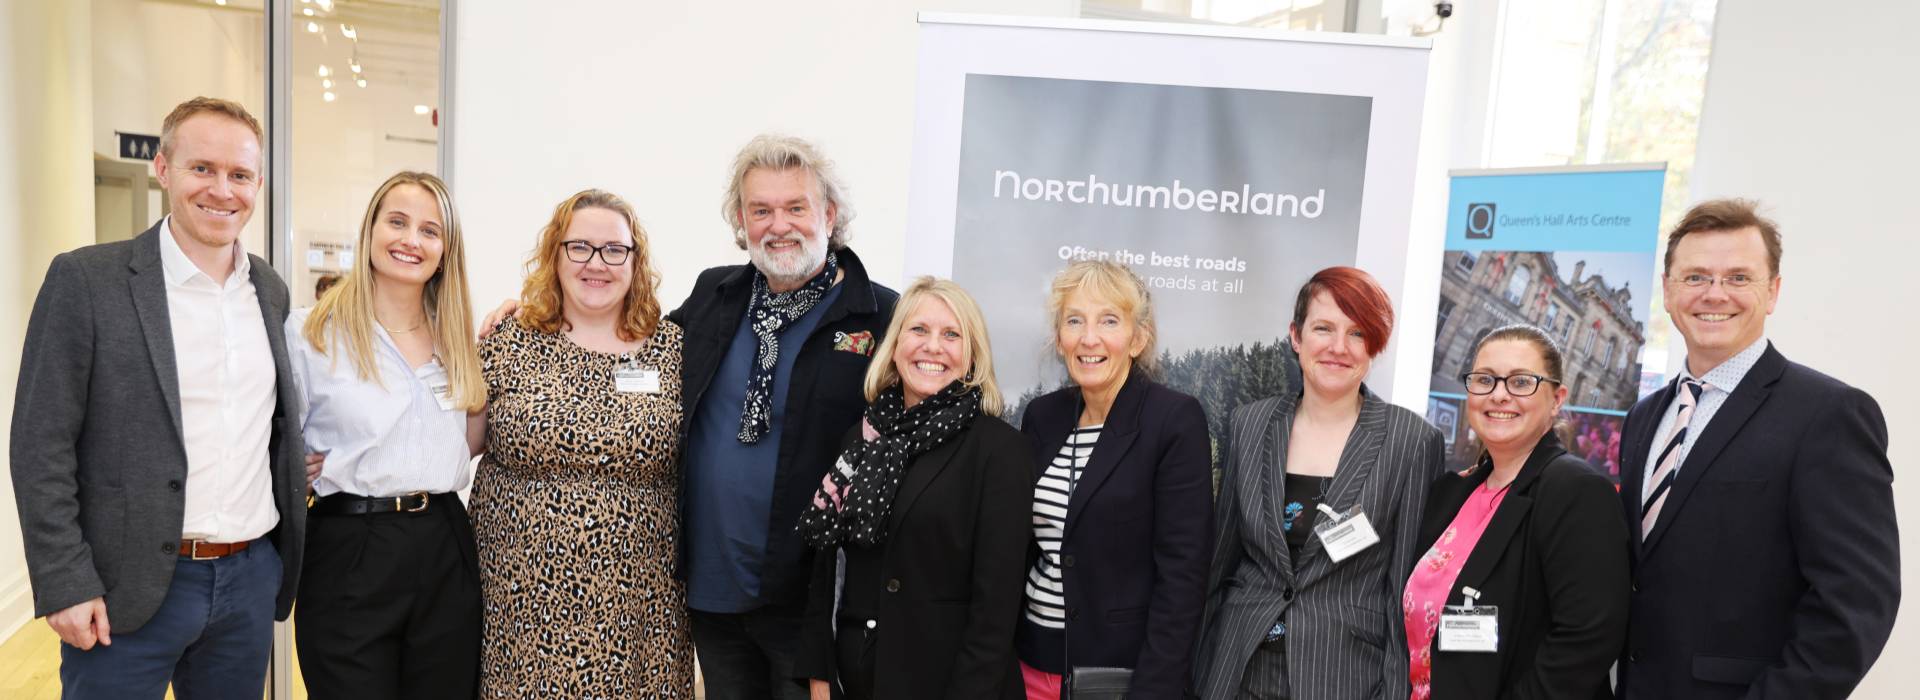 The Visit Northumberland team with Hairy Biker, Si King